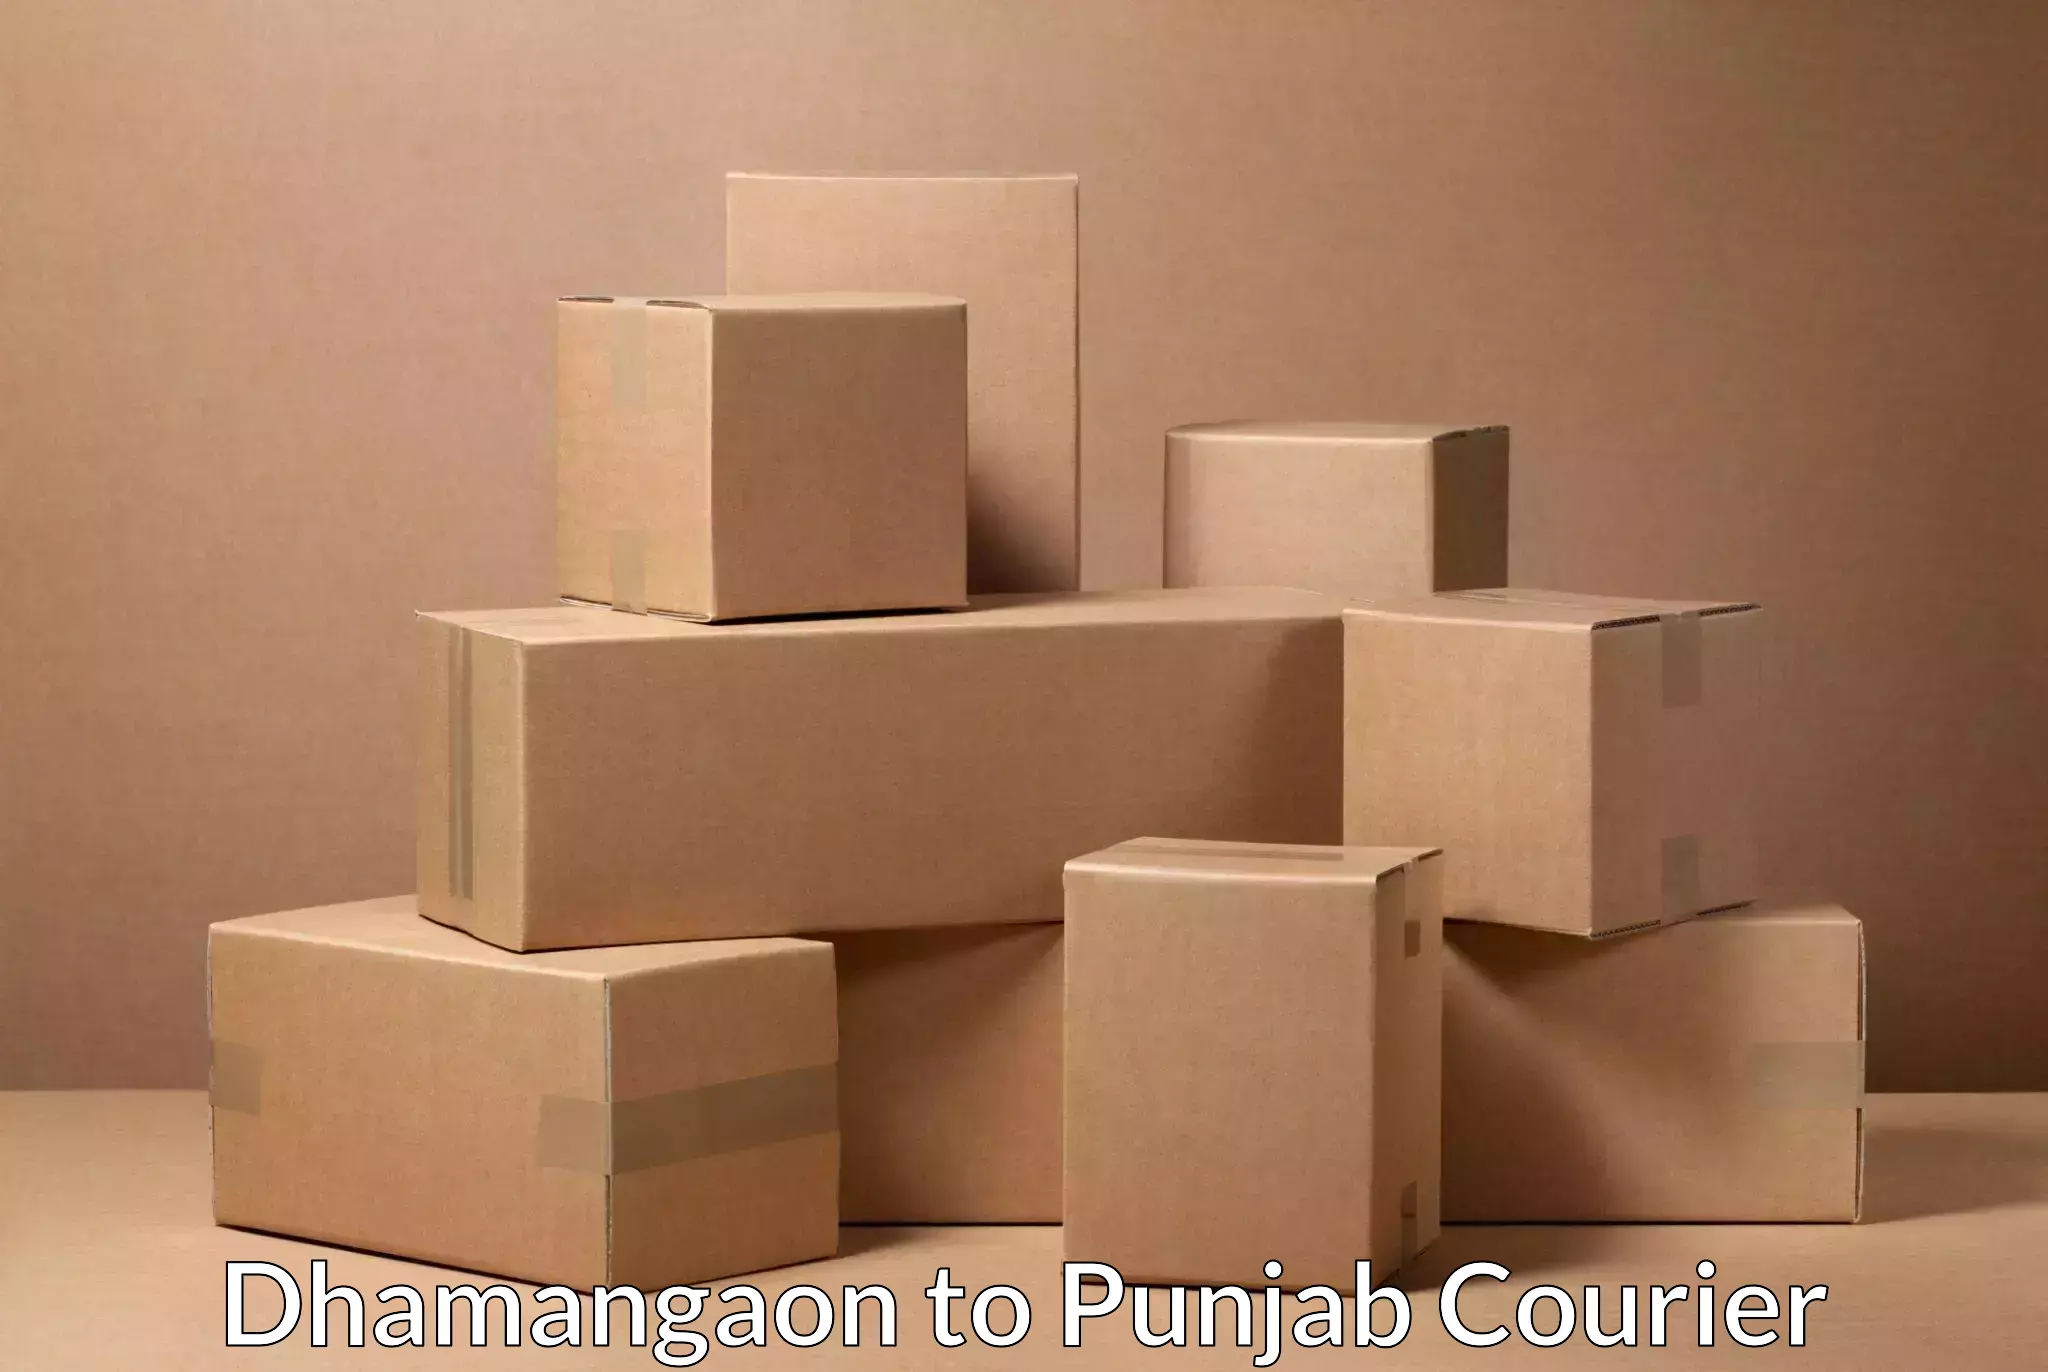 Quality courier services in Dhamangaon to Faridkot